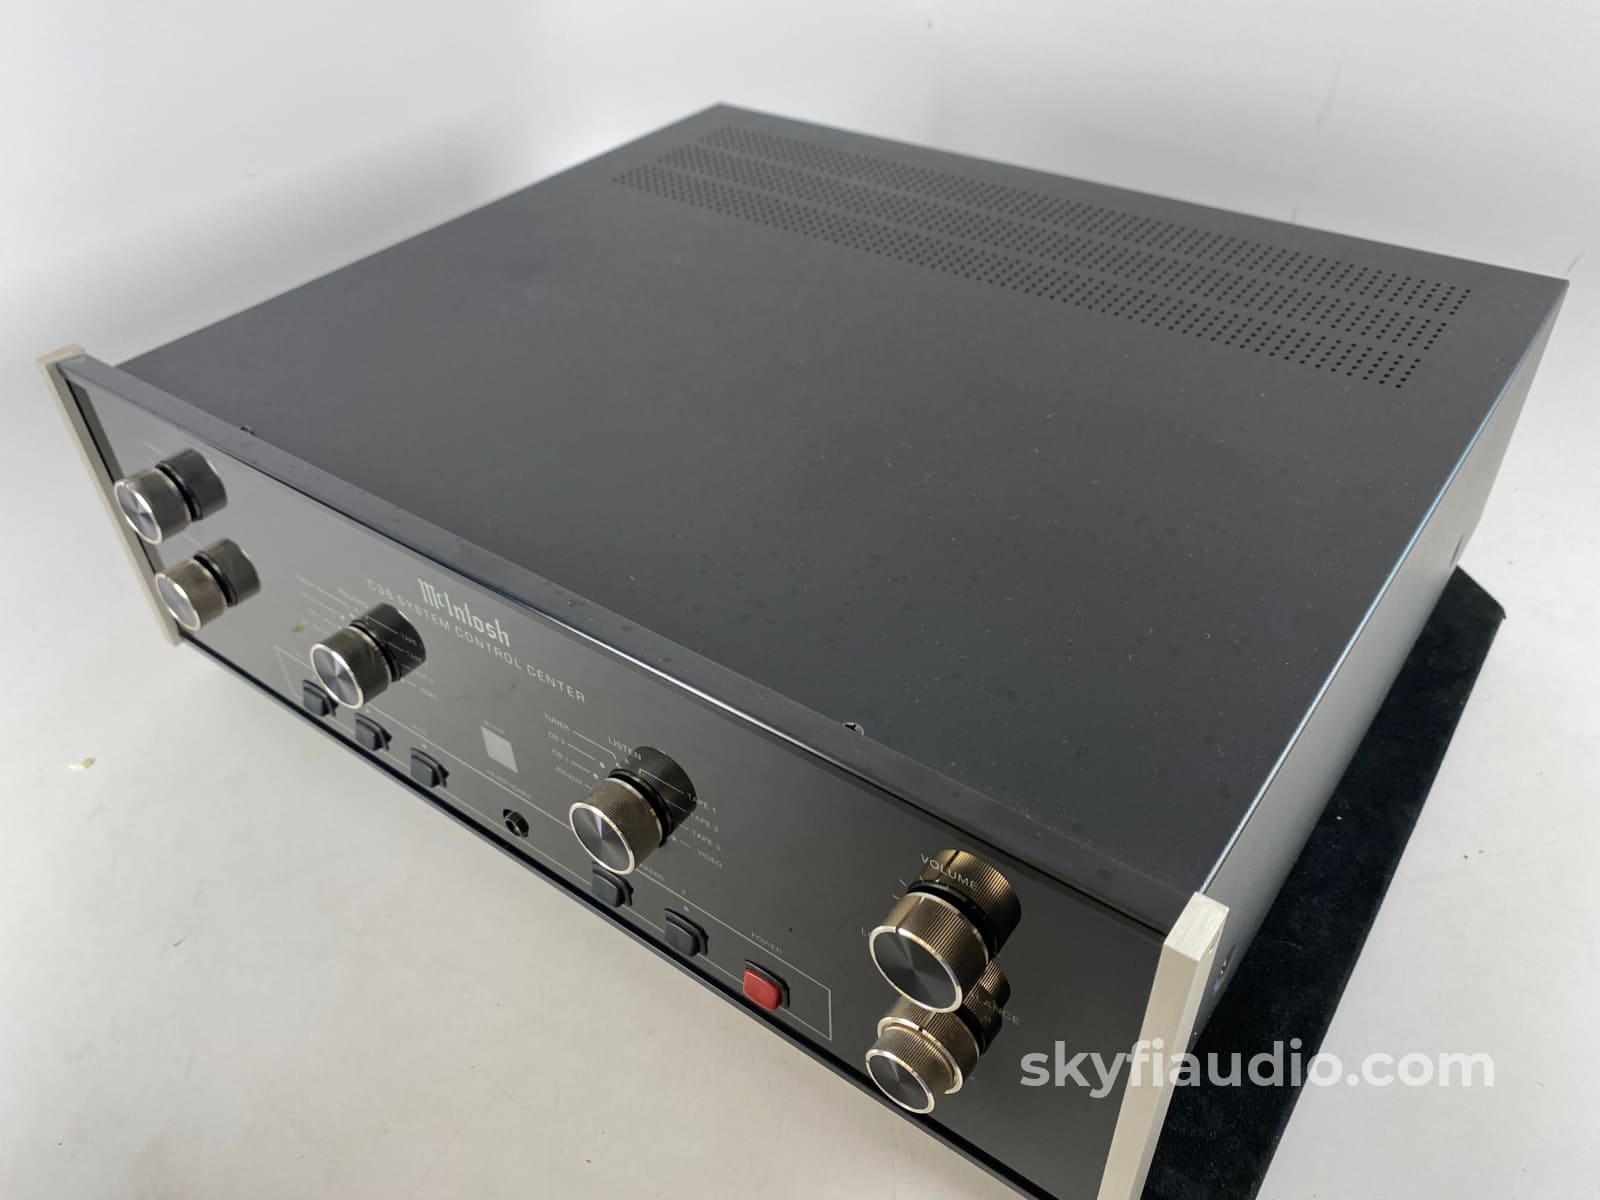 Mcintosh C38 Preamplifier Full Featured Including Phono Stage And Balanced Outputs